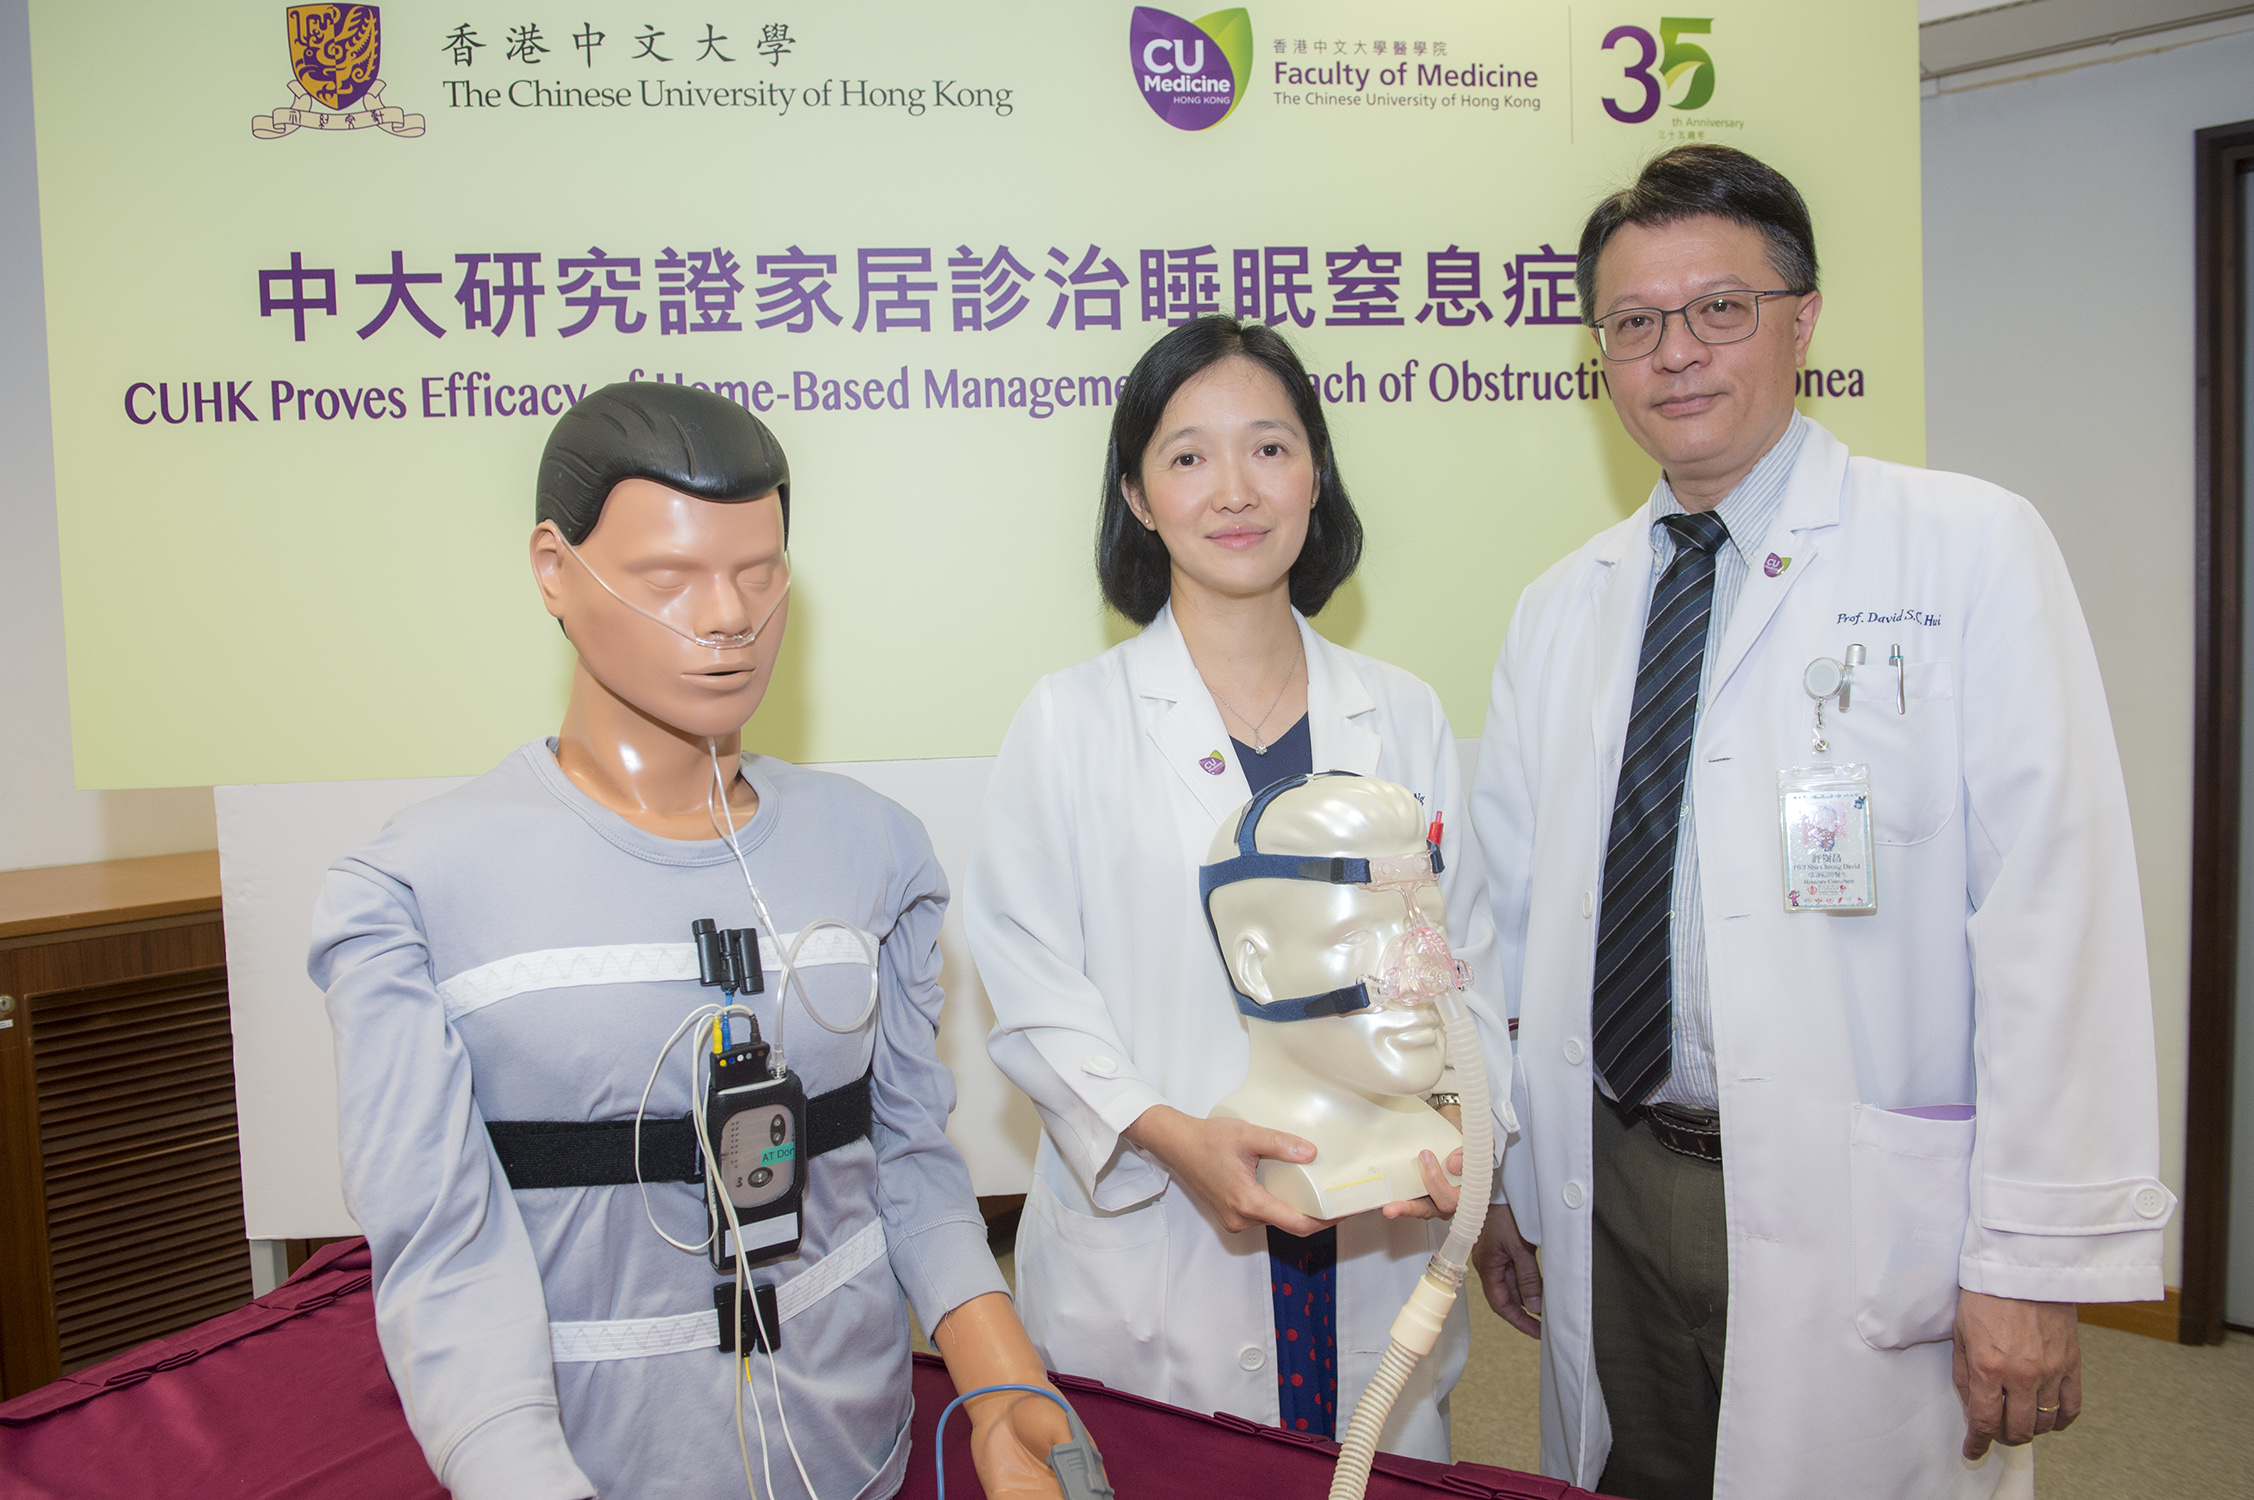 A recent study led by Prof. David Shu Cheong HUI (right), Chairman and Stanley Ho Professor of Respiratory Medicine, Department of Medicine and Therapeutics, and Dr Susanna So Shan NG, Clinical Assistant Professor (Honorary), Department of Medicine and Therapeutics, CUHK Faculty of Medicine, proves that the ambulatory approach of managing obstructive sleep apnoea (OSA) can shorten 80% waiting time and substantially lower medical costs.